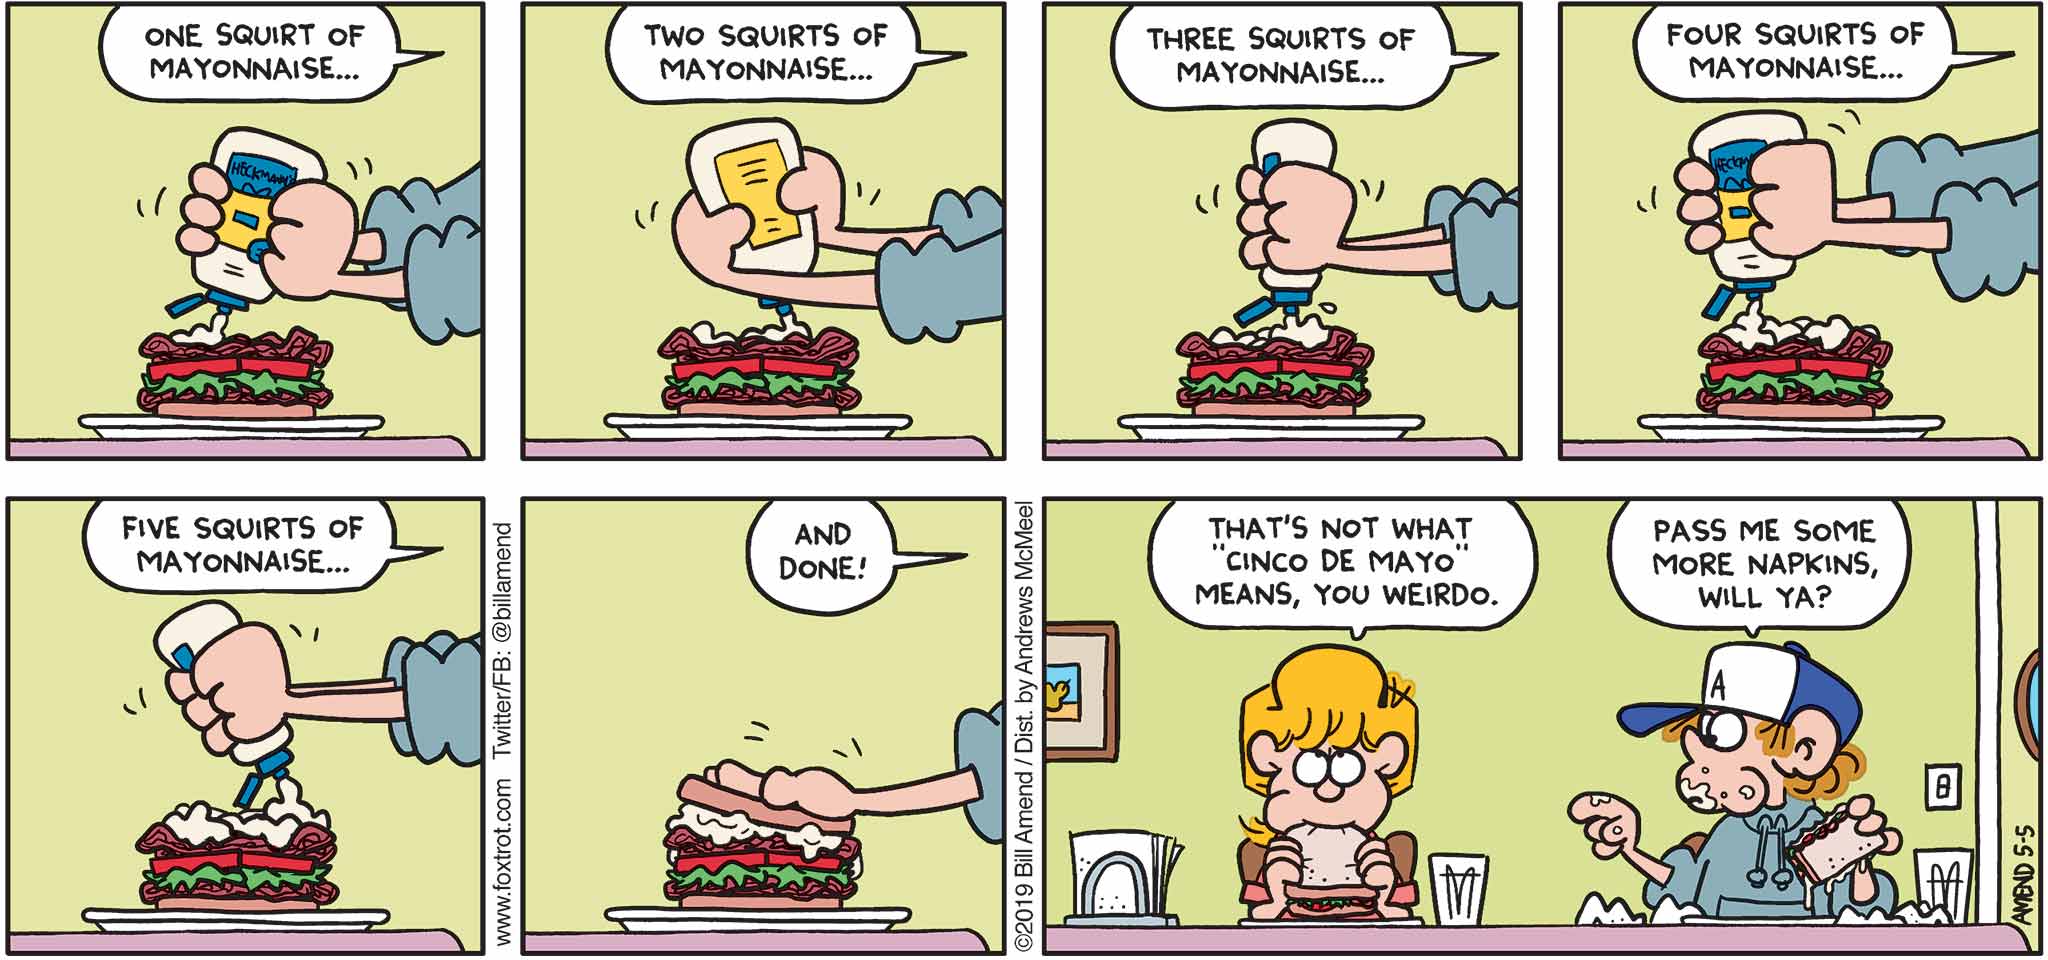 FoxTrot by Bill Amend - "Mayo" published May 5, 2019 - Peter: One squirt of mayonnaise... Two squirts of mayonnaise... three squirts of mayonnaise... four squirts of mayonnaise... five squirts of mayonnaise... and done! Paige: That's not what "Cinco de Mayo" means, you weirdo. Peter: Pass me some more napkins, will ya?